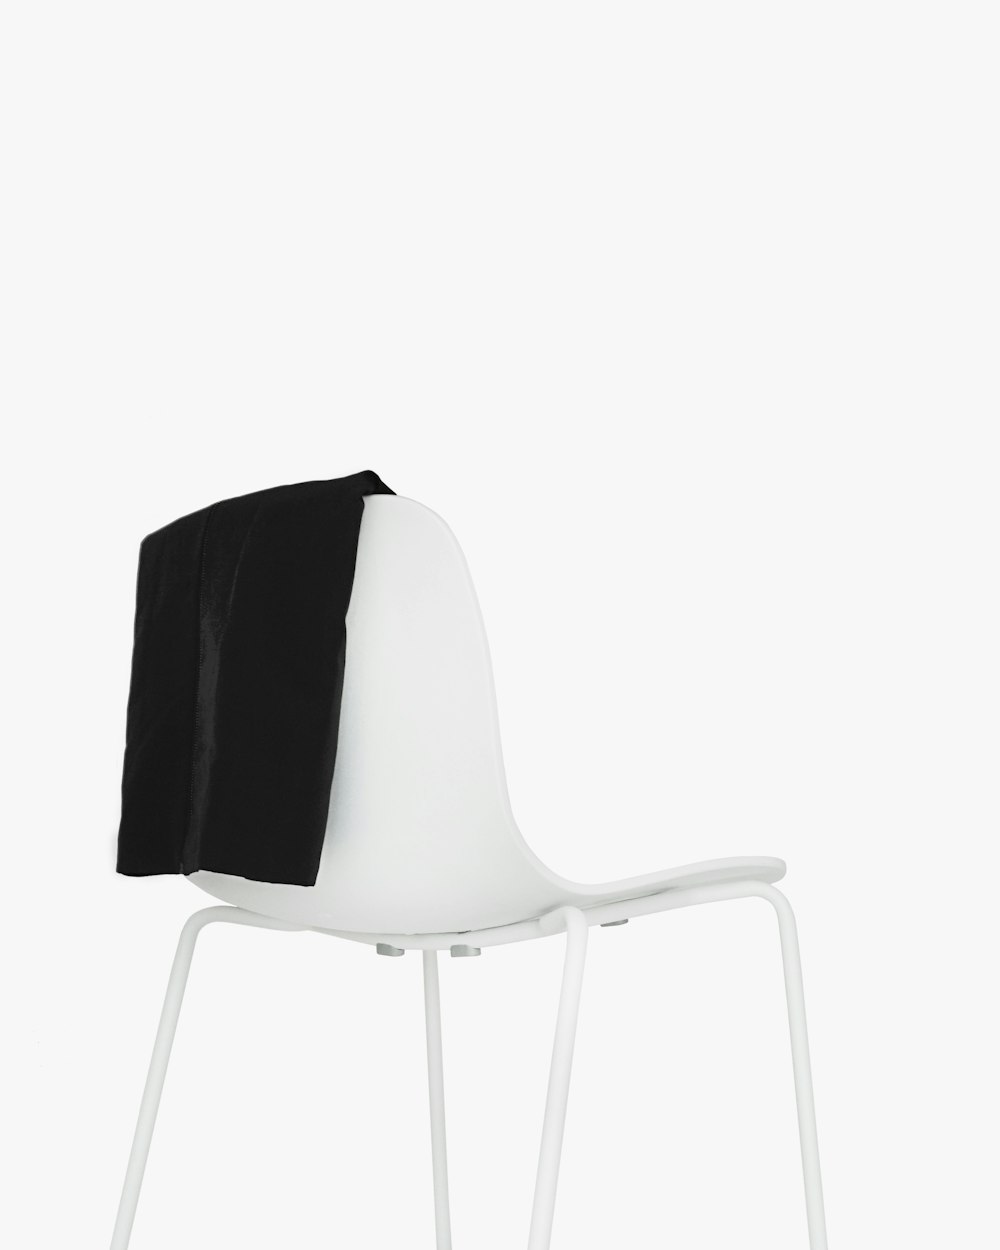 white metal armchair with white background